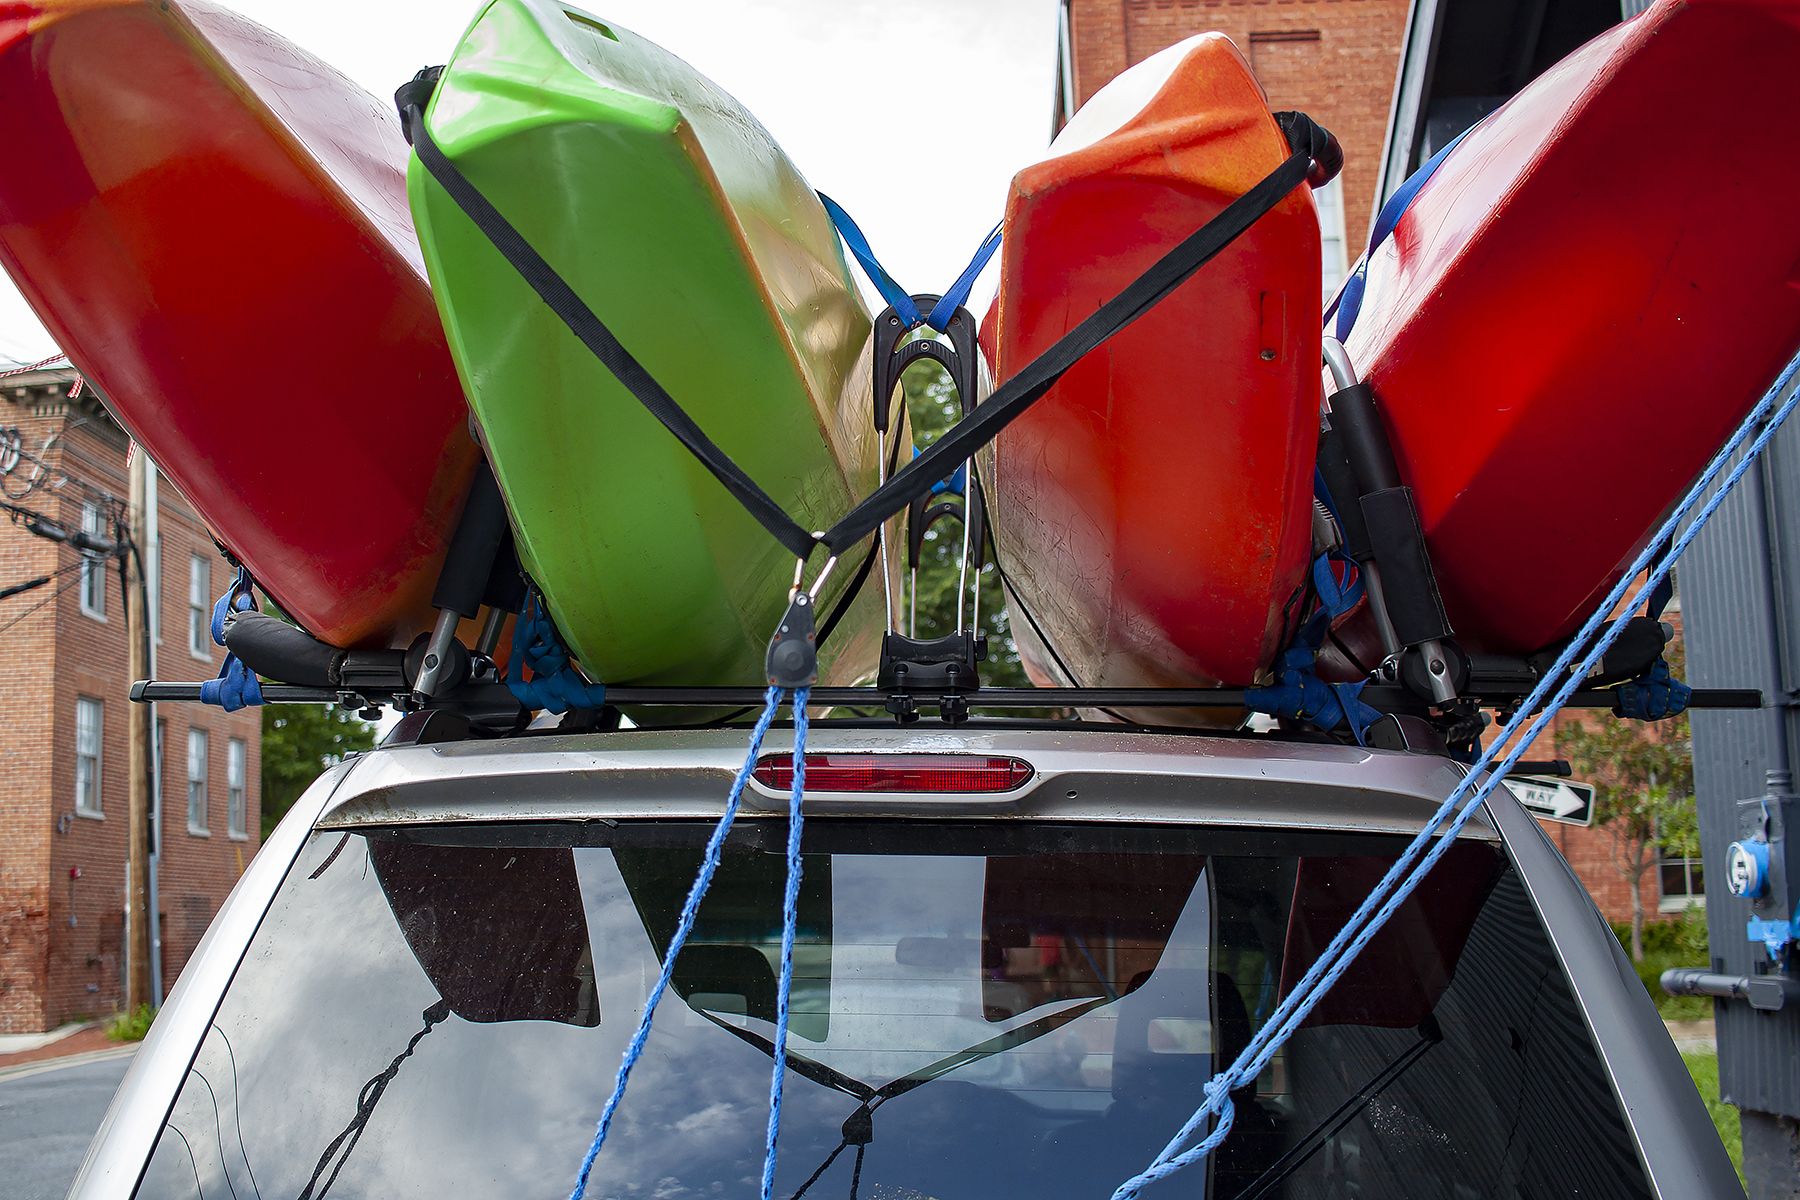 Your guide to safely securing items to your vehicle's roof rack